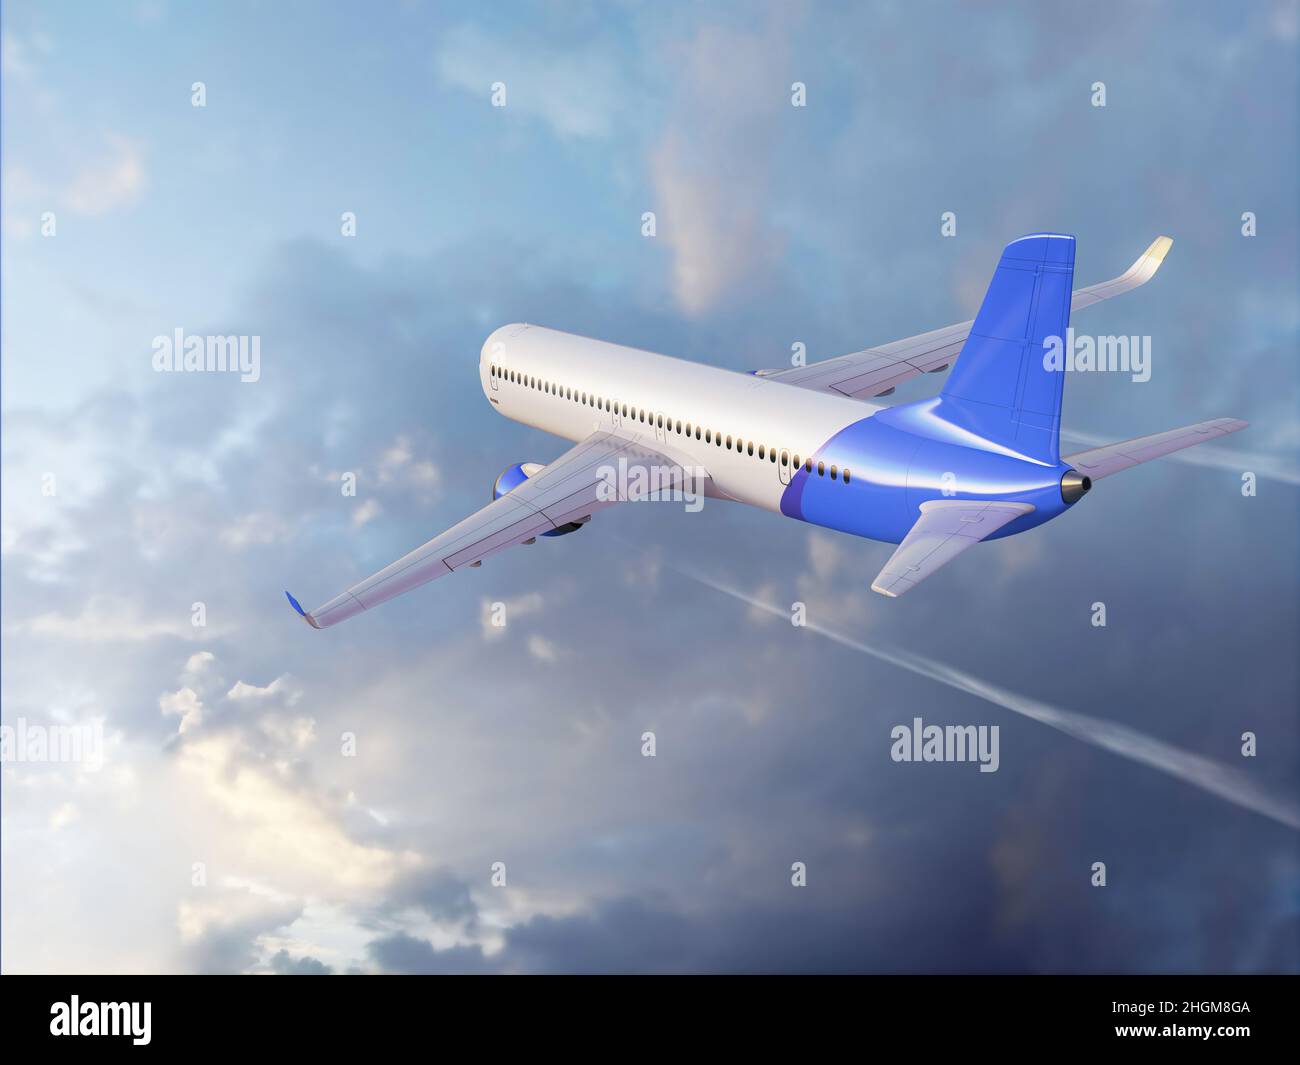 Commercial aeroplane flying in the clouds, illustration Stock Photo